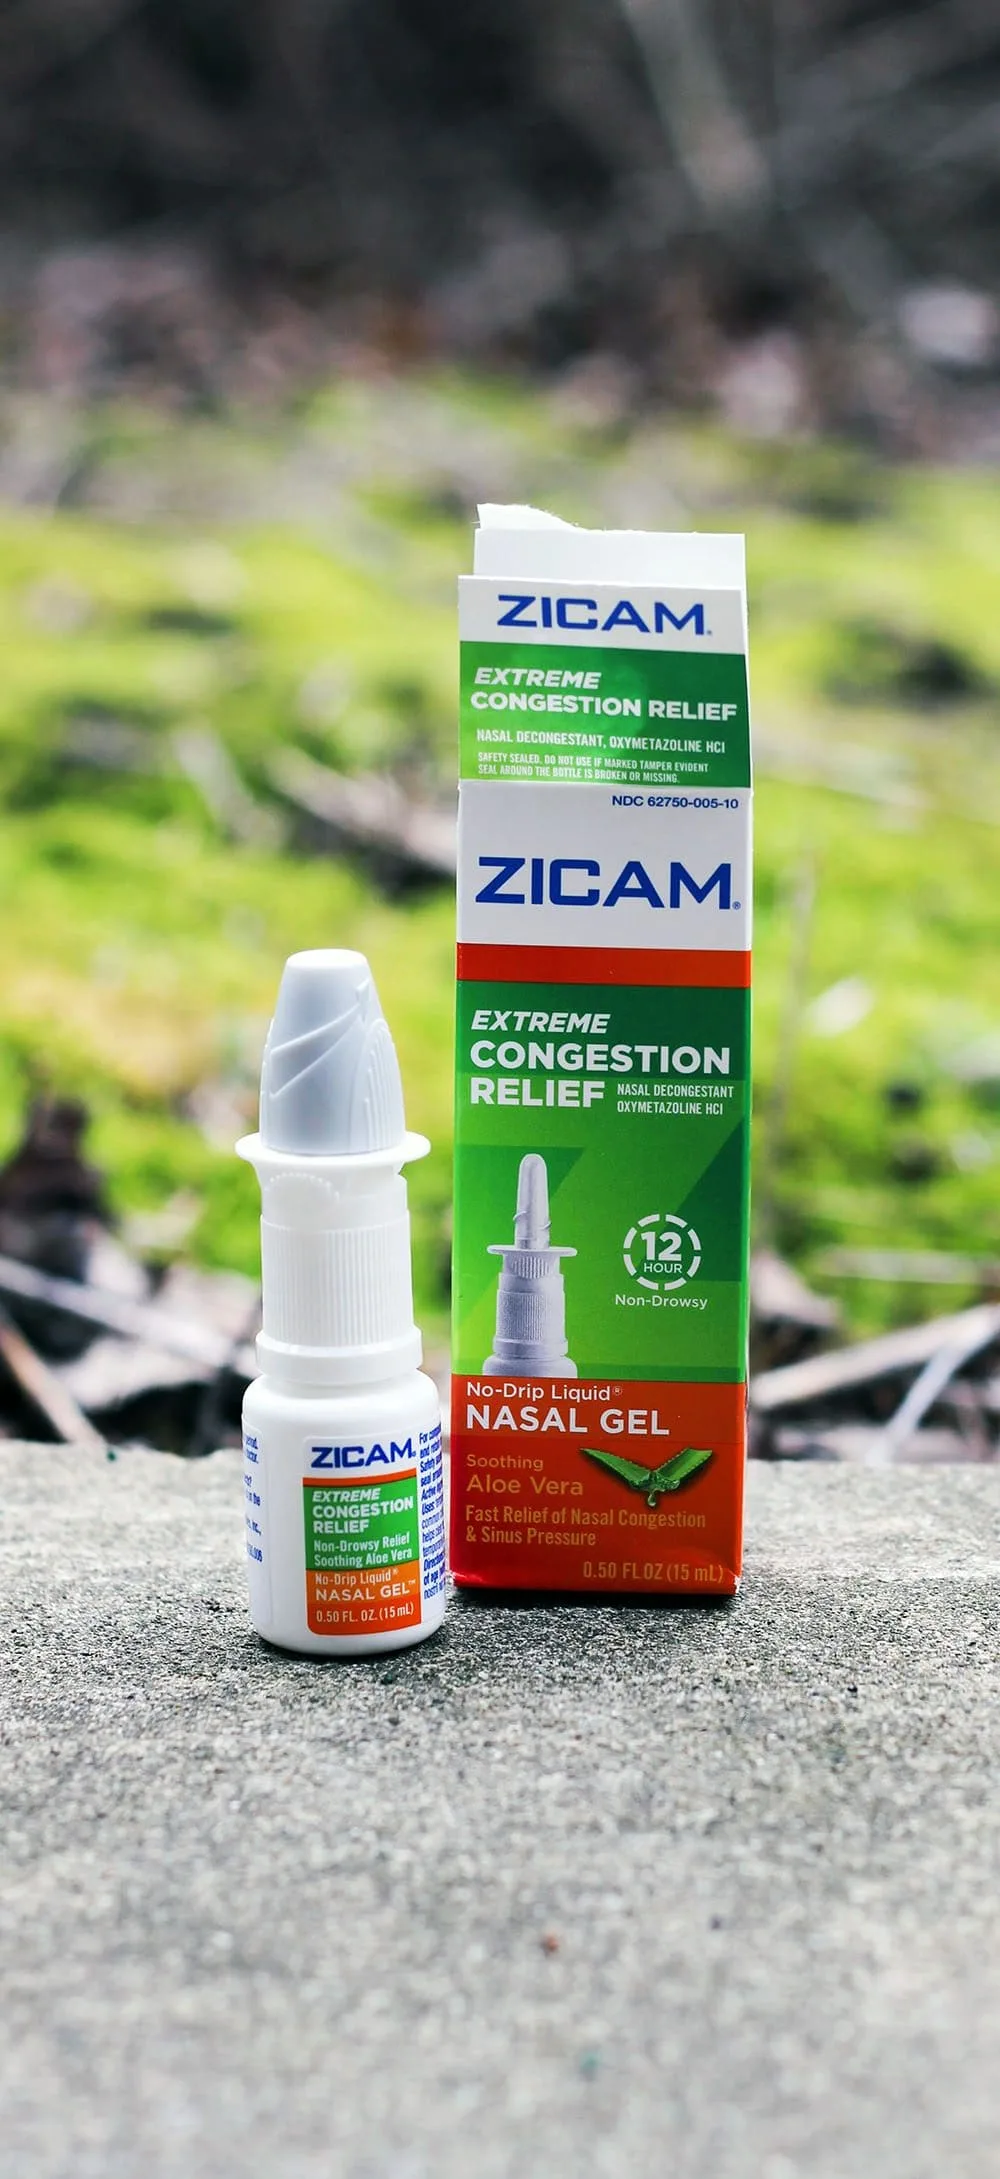 Zicam® Extreme Congestion Relief Spray is a No-Drip Liquid® Nasal Gel™ that helps knock out nasal congestion and sinus pressure due to colds or allergies.